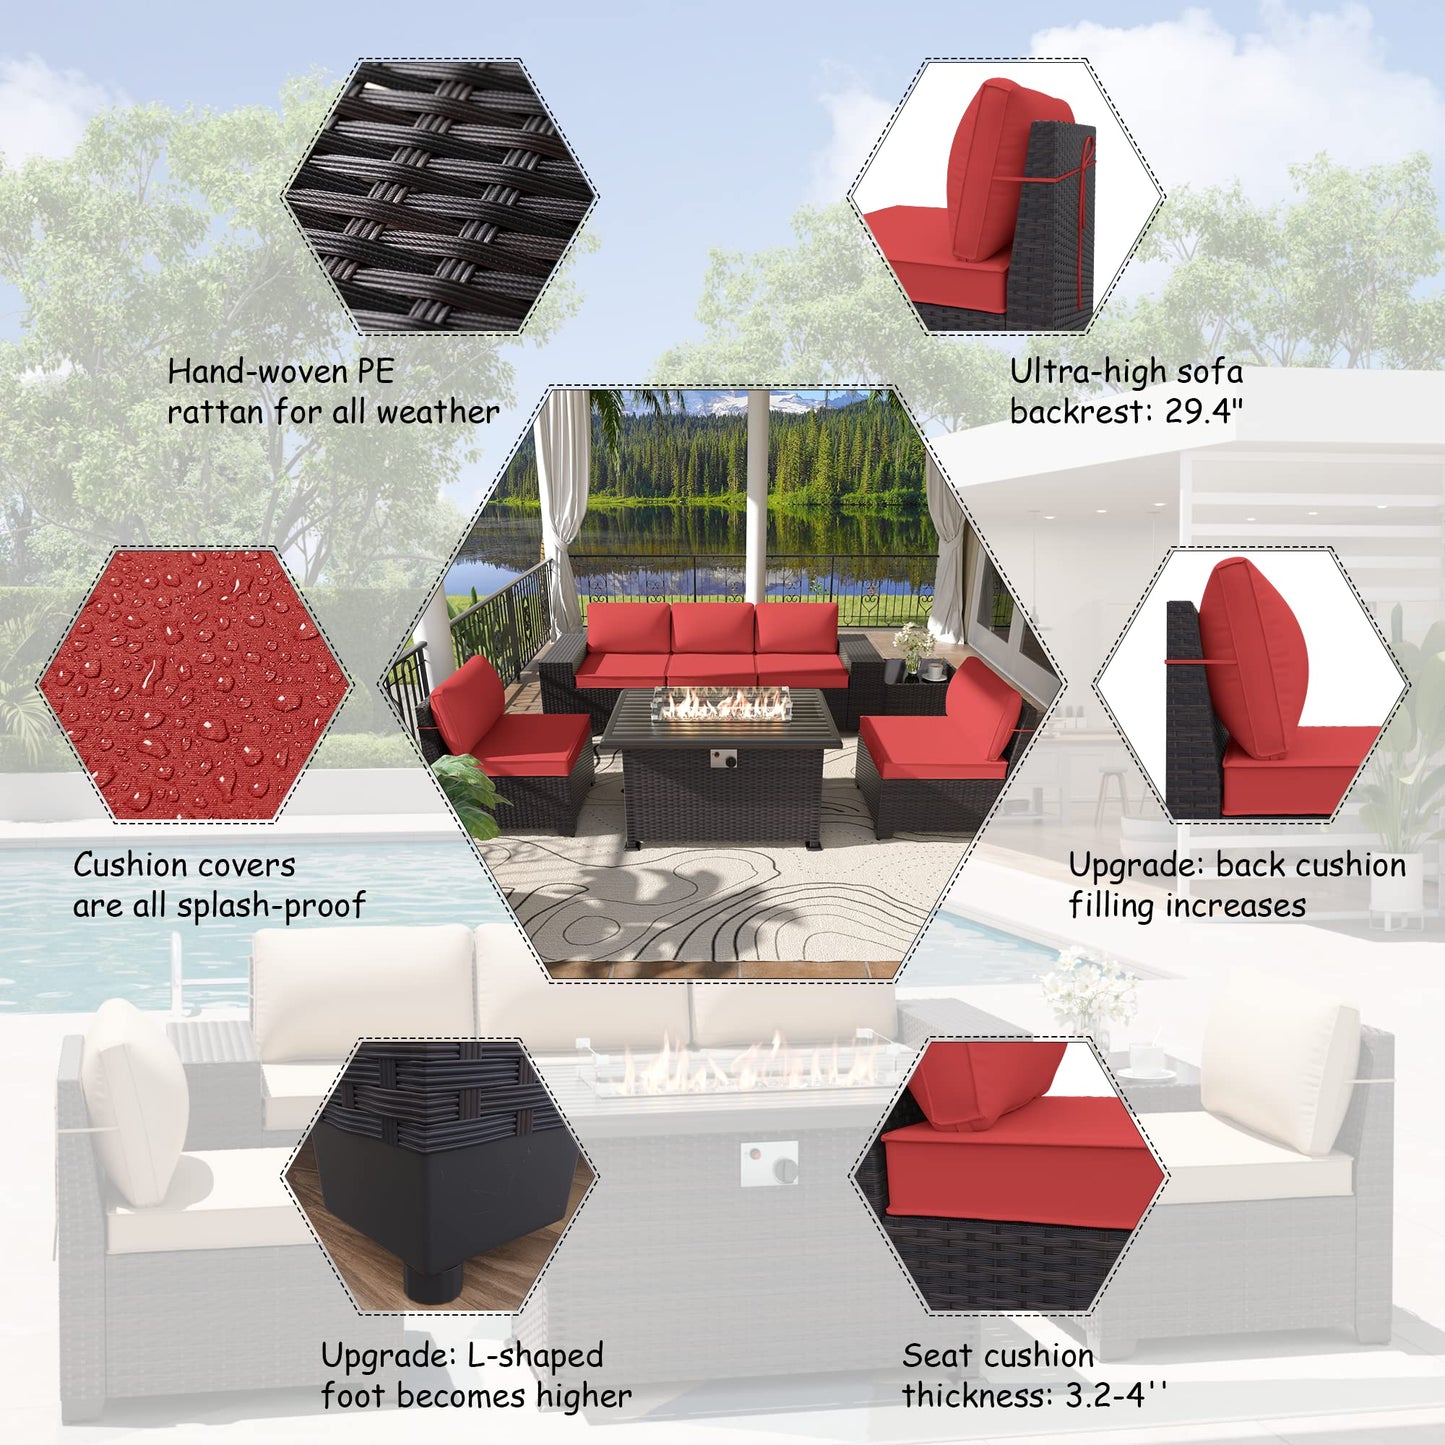 ALAULM 7 Pieces Outdoor Patio Furniture Set with Propane Fire Pit Table Patio Sectional Sofa Sets - Red